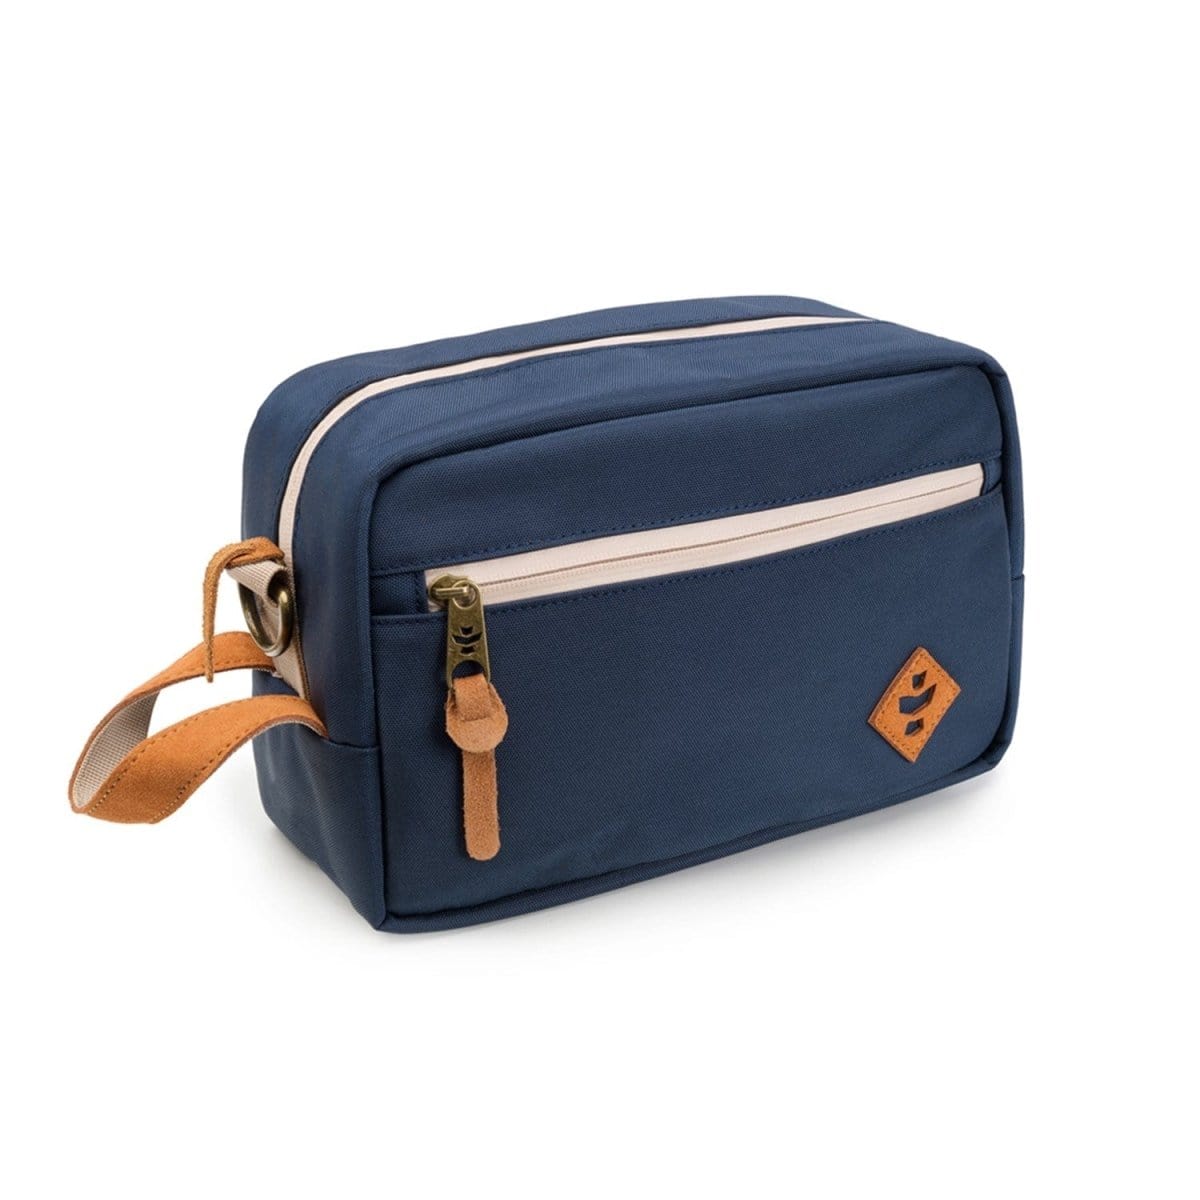 Revelry Supply Travel Bag Navy Blue The Stowaway - Smell Proof Toiletry Kit